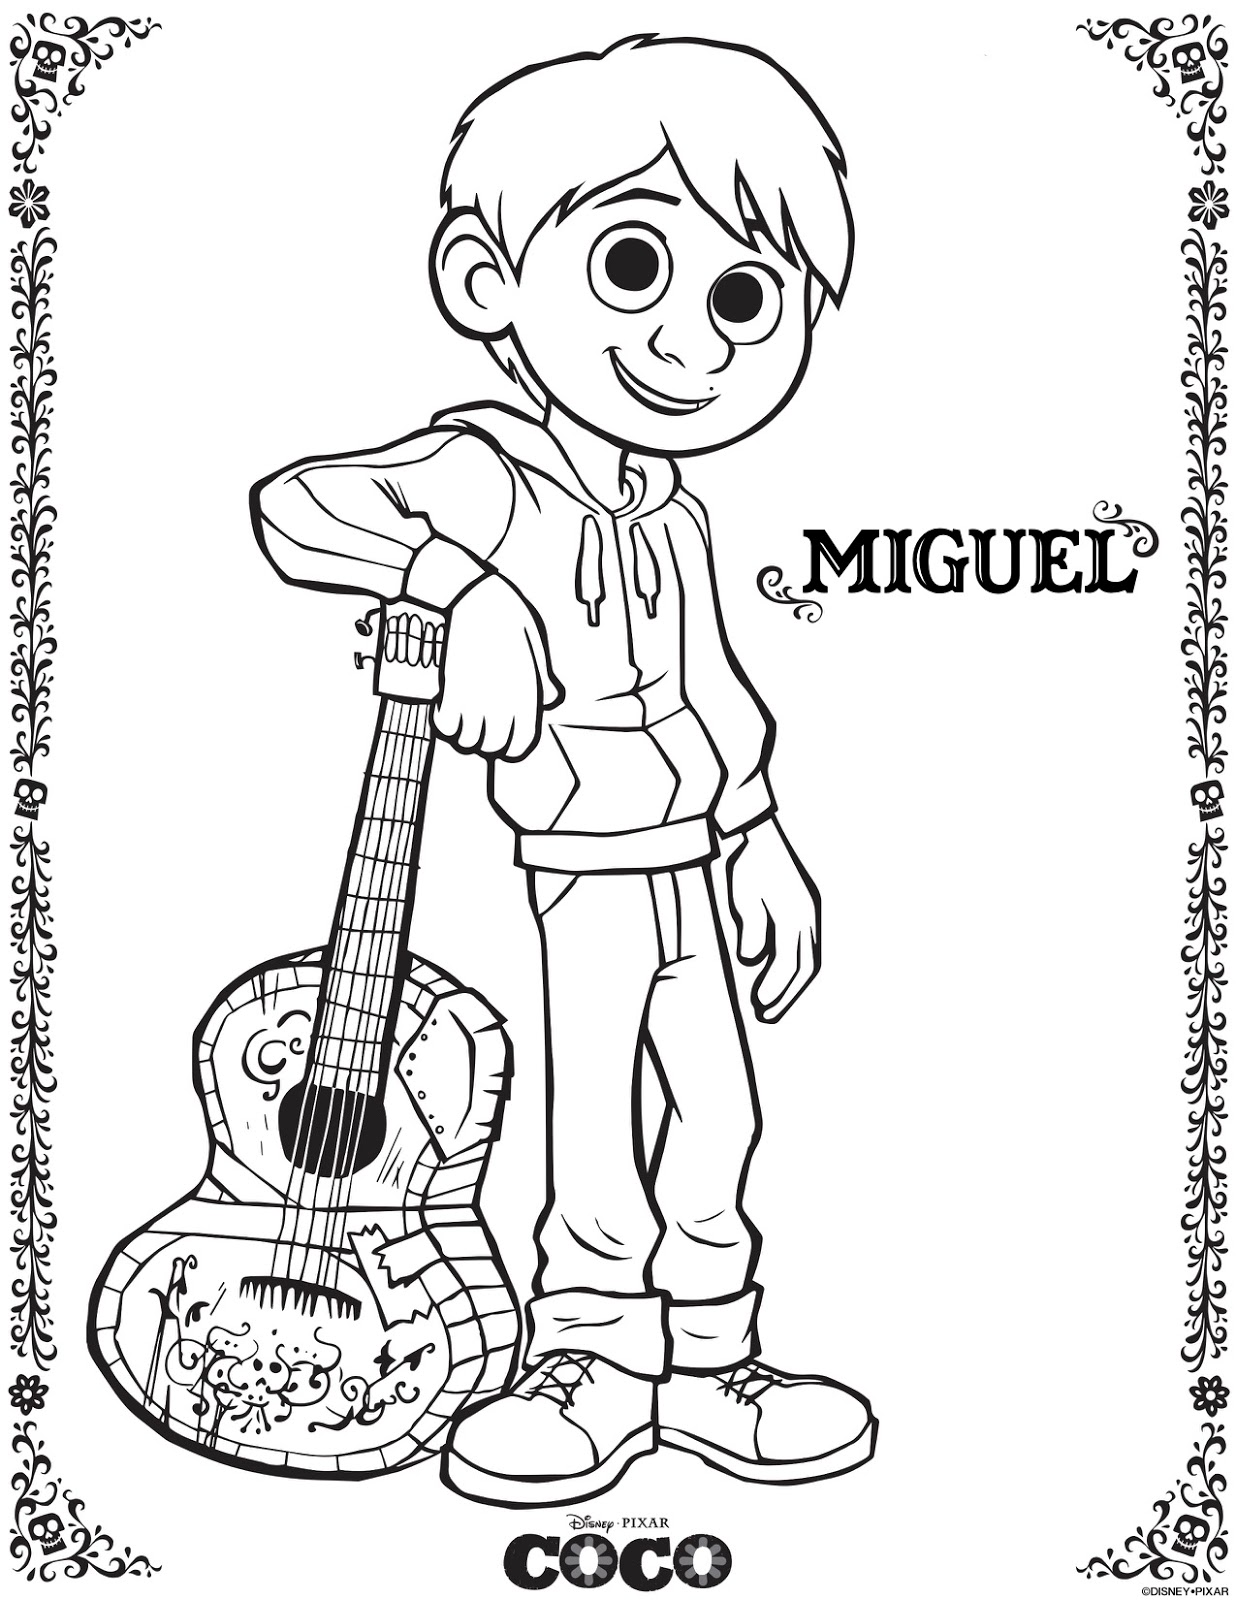 Woven by Words: Disney•Pixar's COCO - Coloring Pages